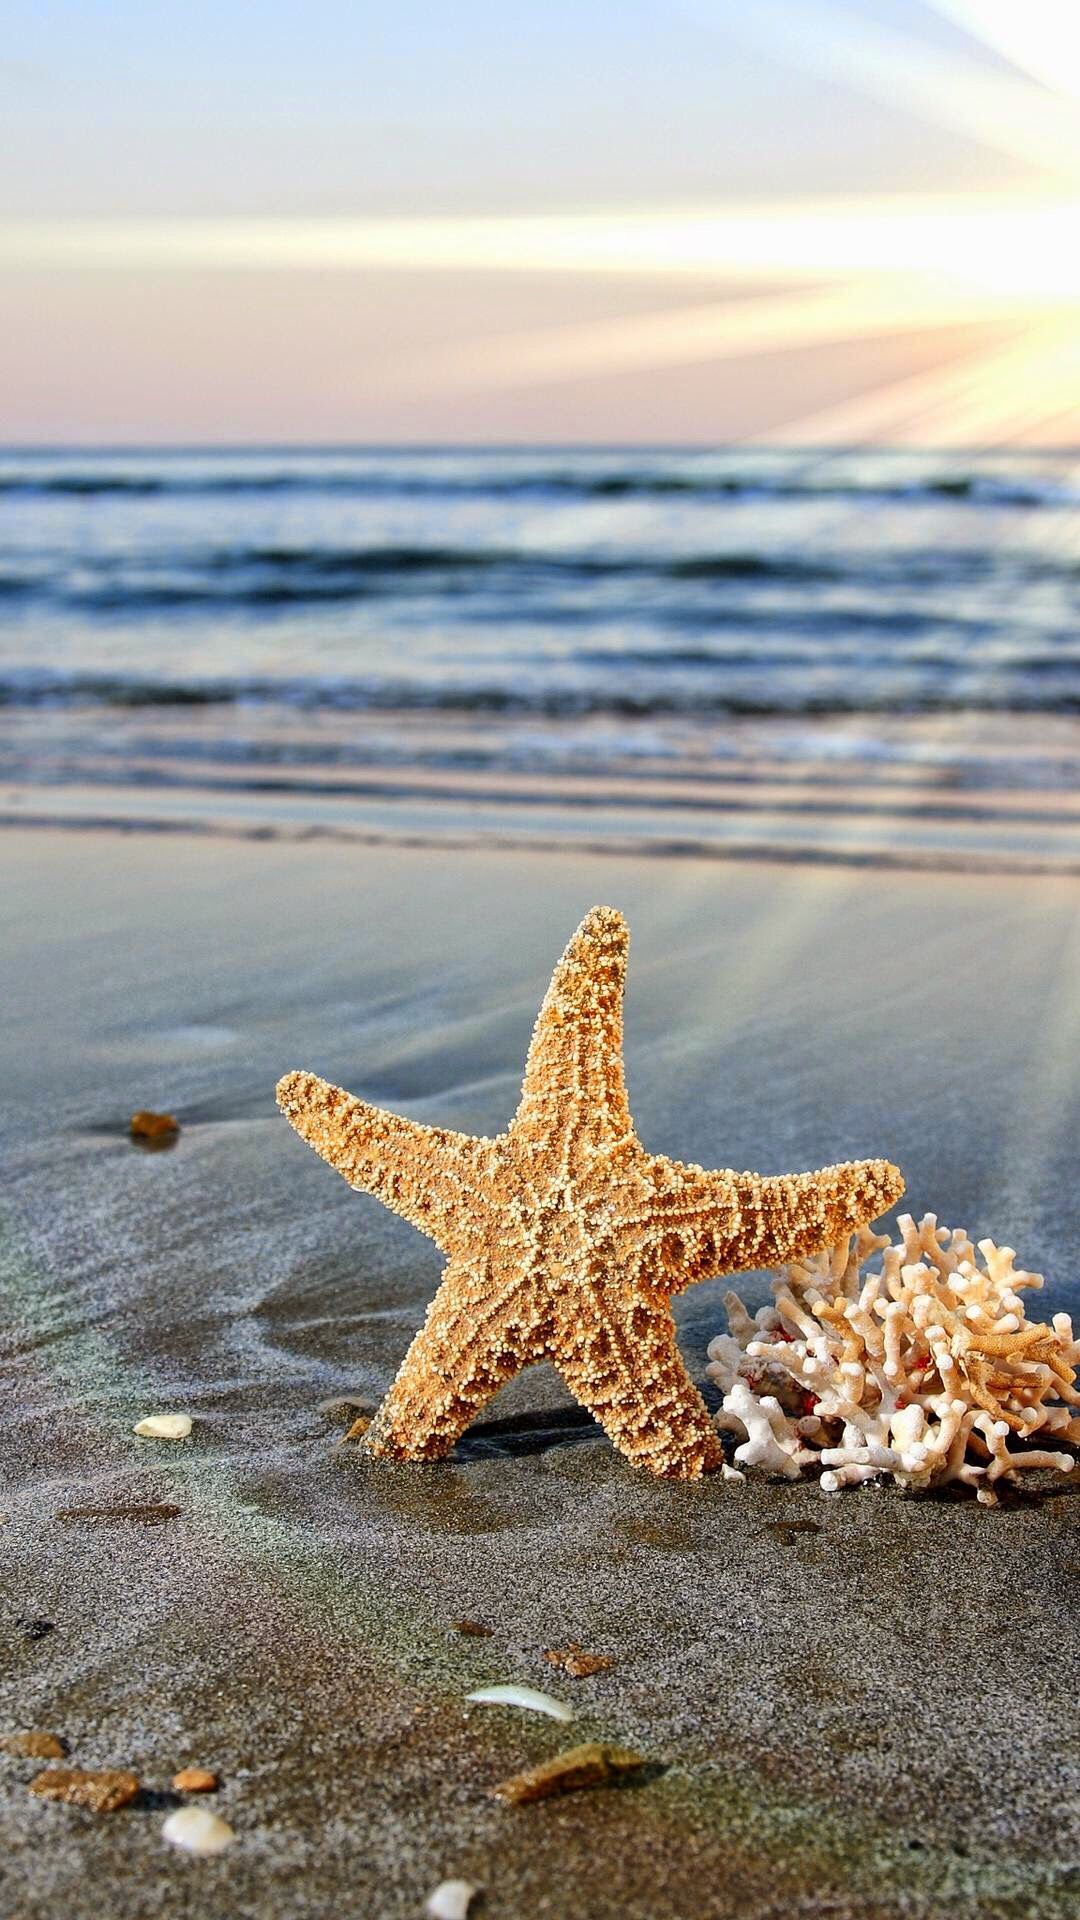 A starfish on the beach with the ocean in the background. - Starfish